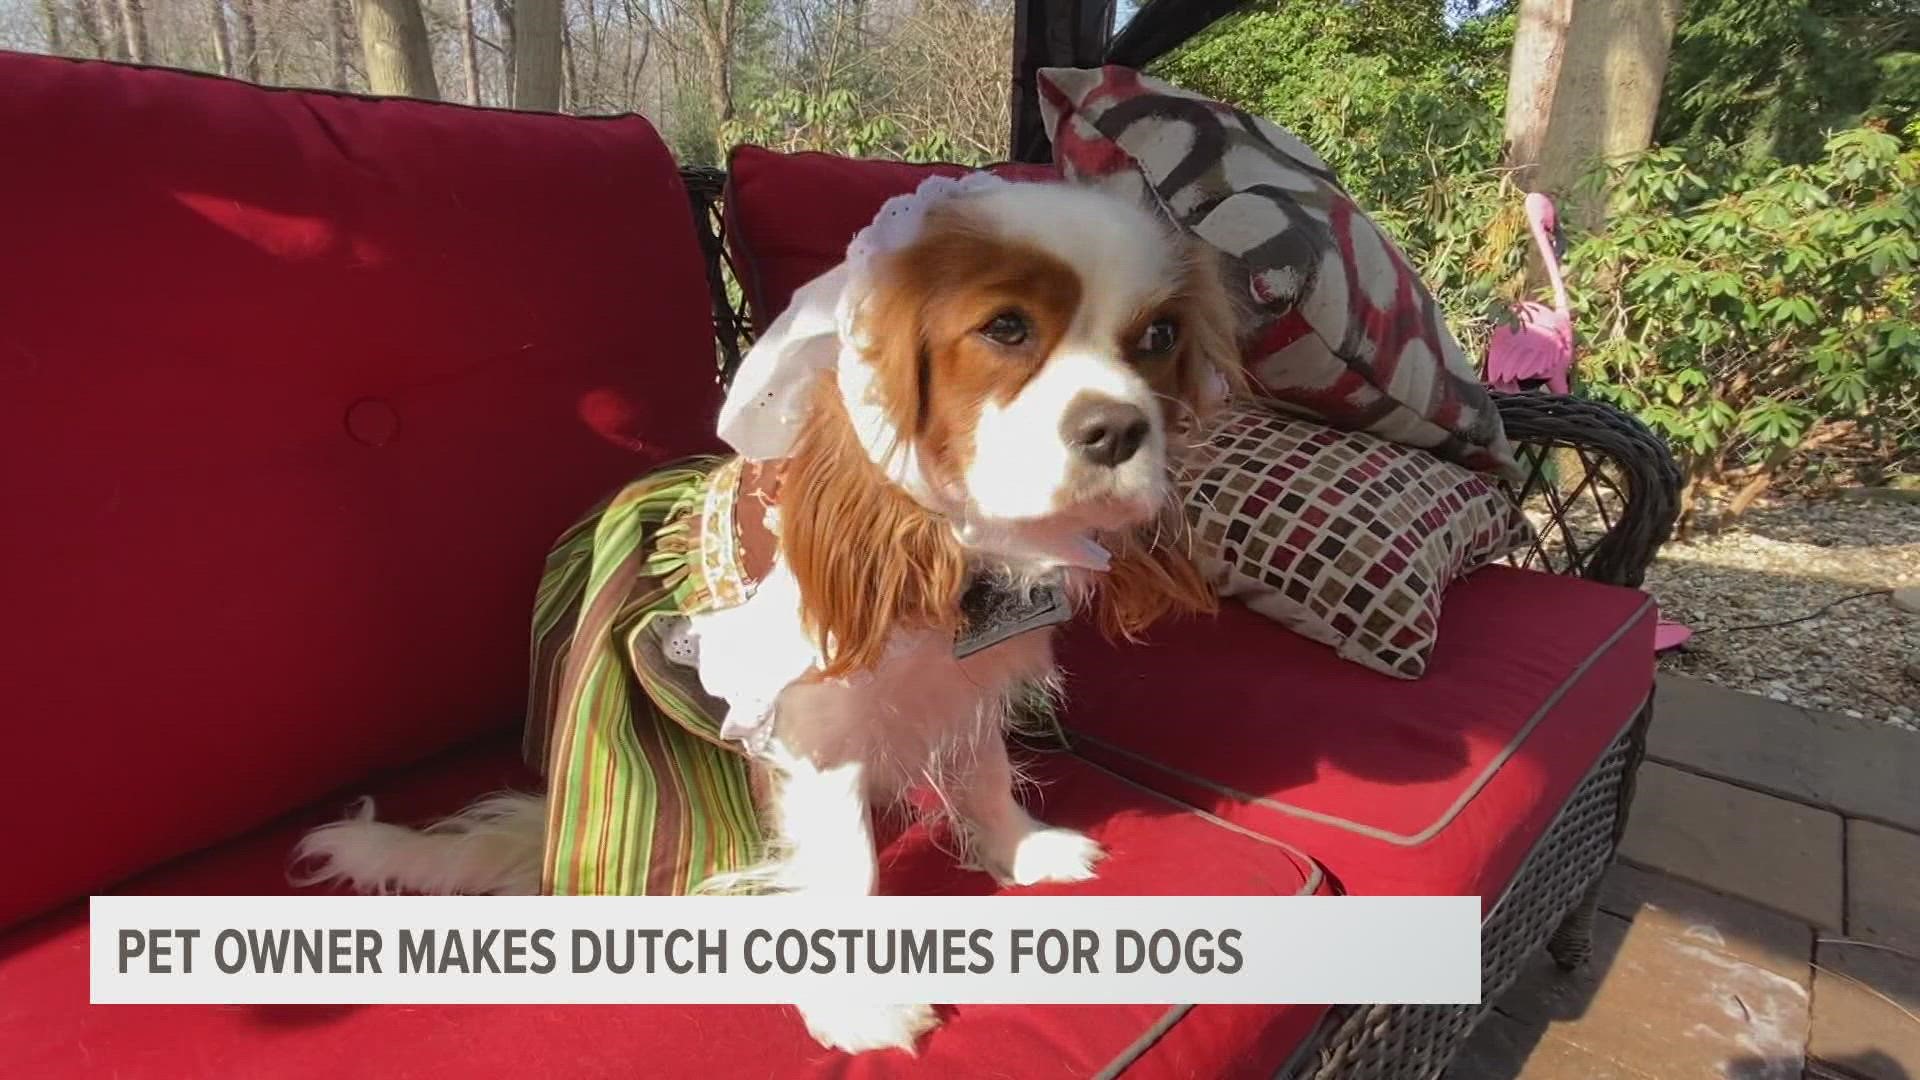 This adorable horde of Cavalier King Charles Spaniels are getting used to the Dutch costumes they’ll be wearing during the Tulip Time parade.